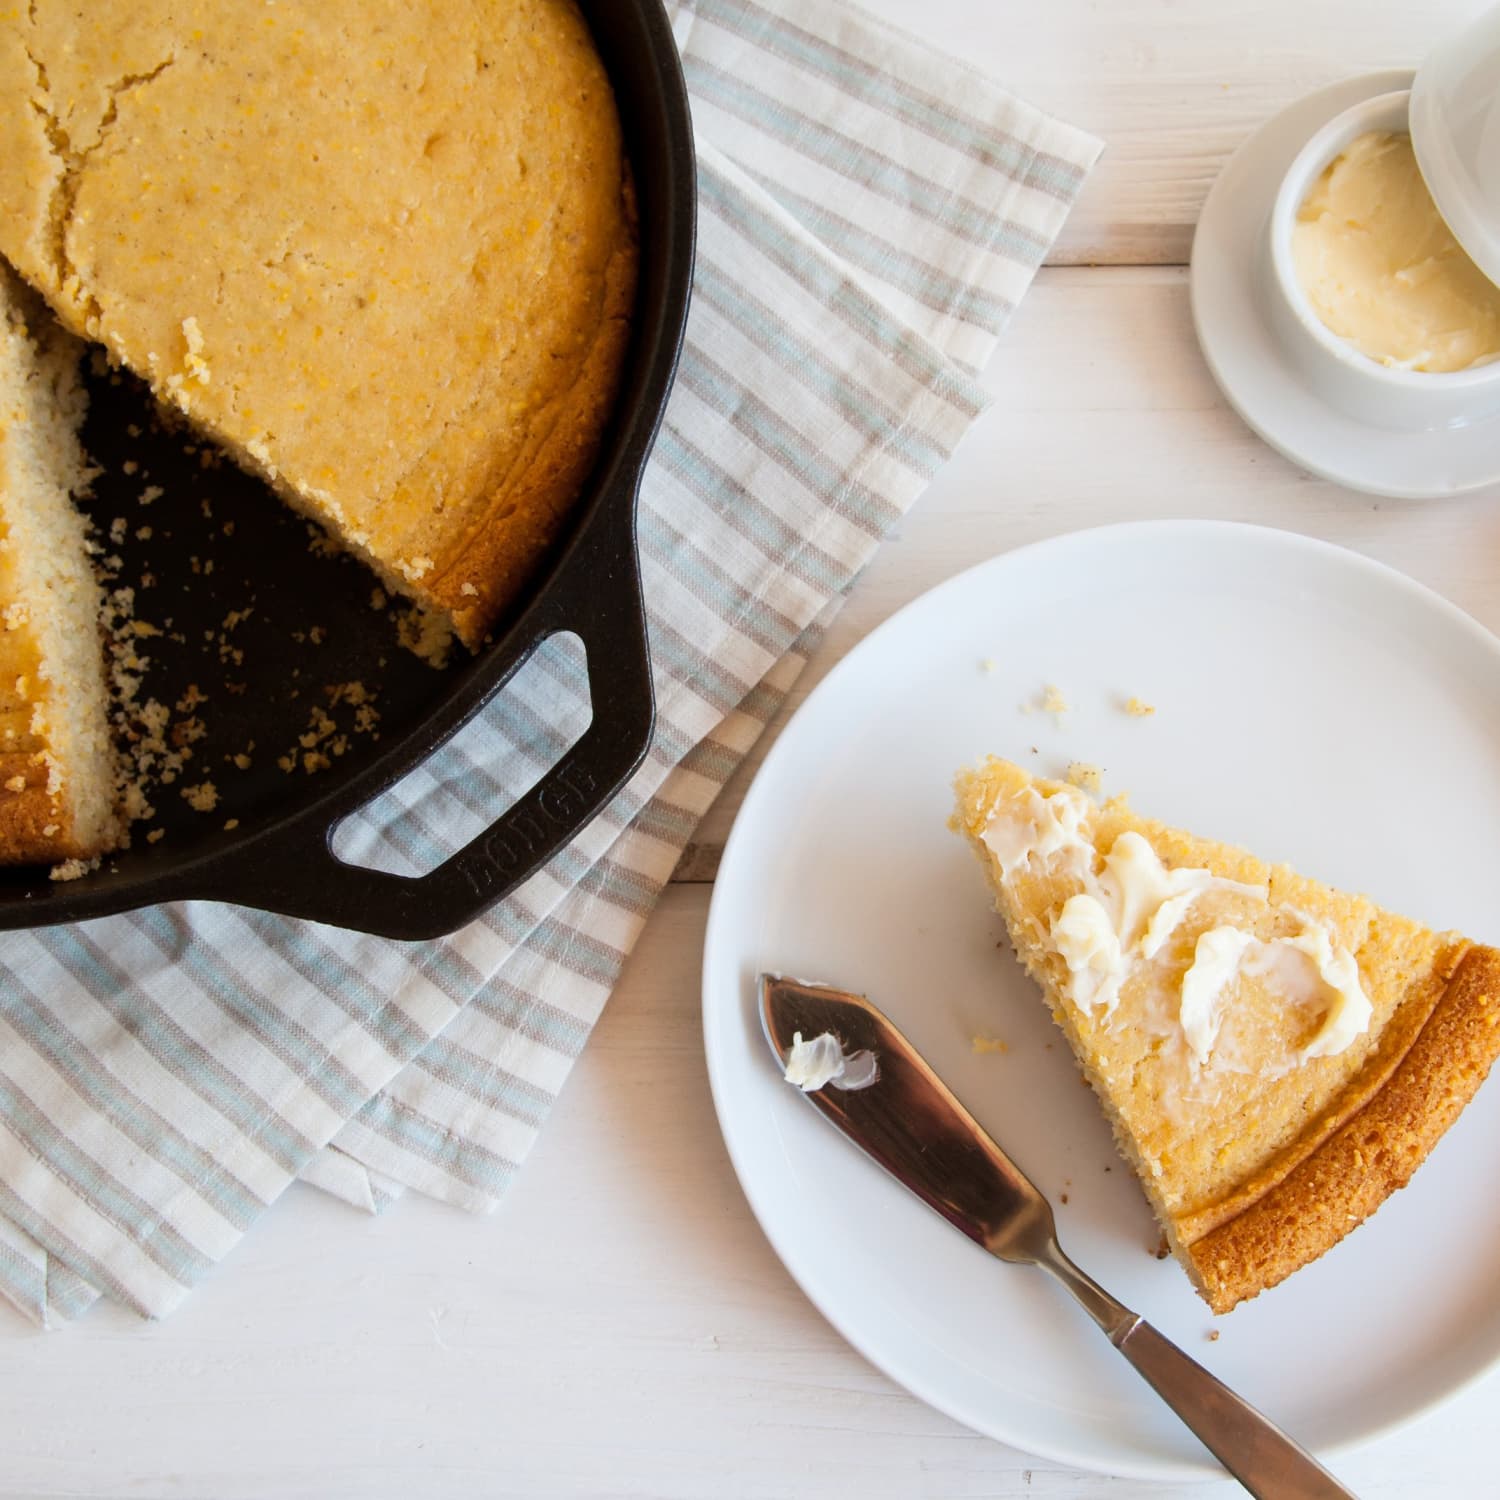 How to Bake Cornbread in a Cast-Iron Mold